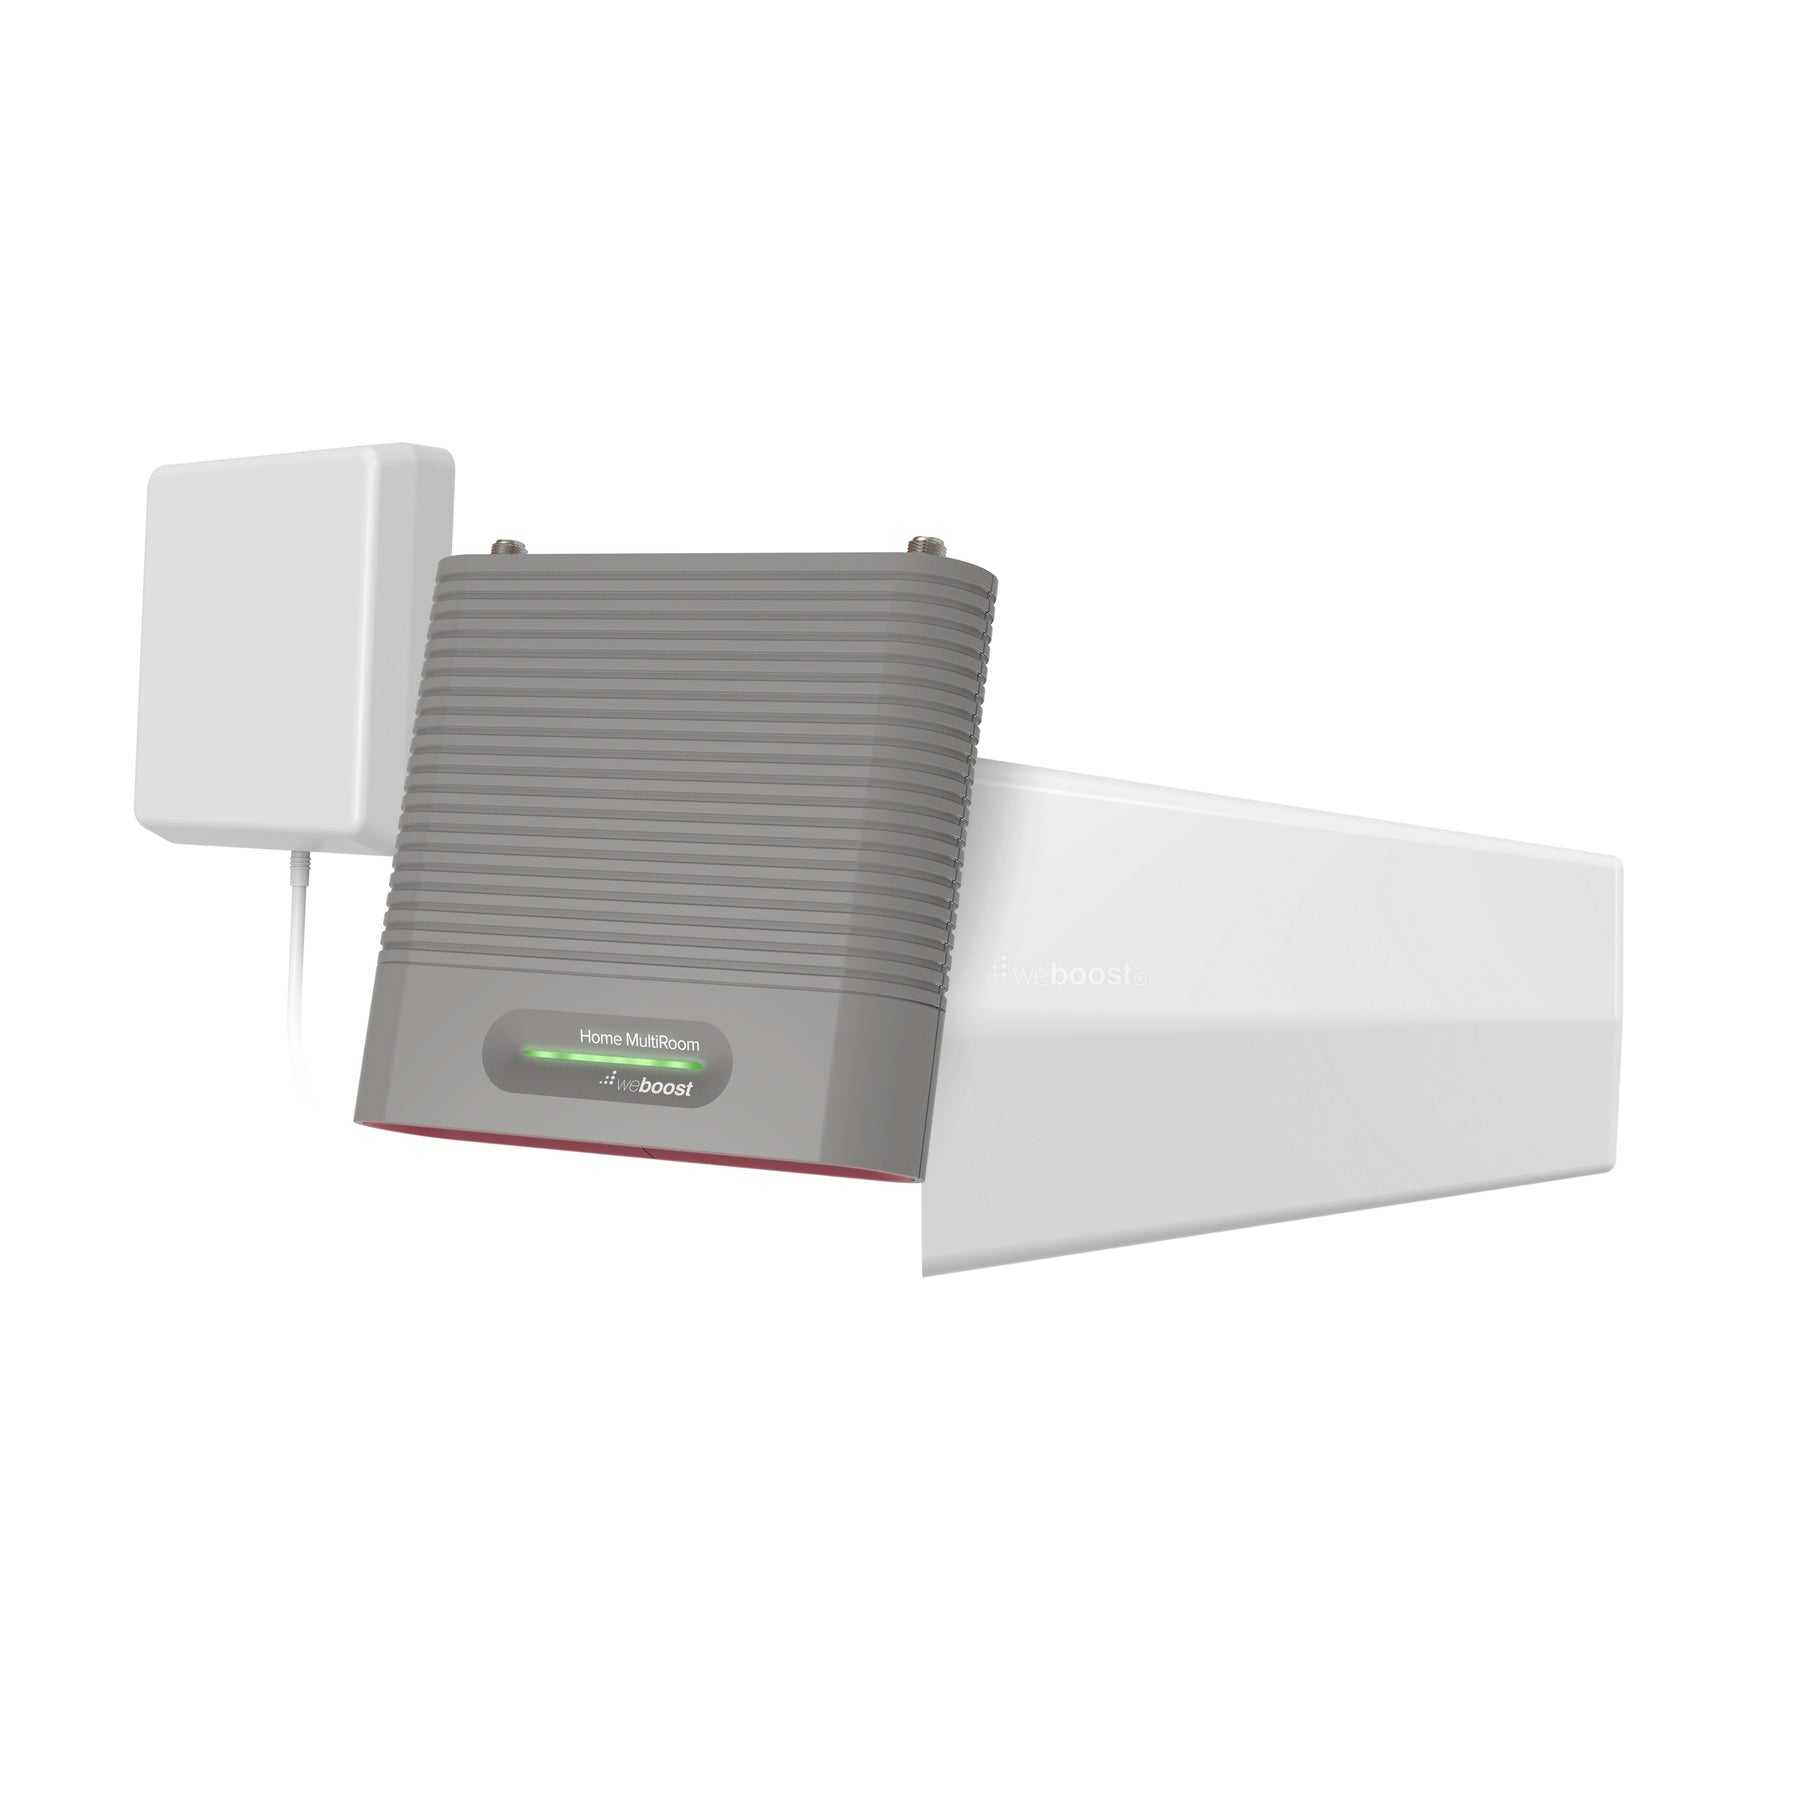 weBoost Destination RV (650159) Cell Phone Signal Booster Kit for Stationary Use Only | USA Company | All CA Carriers - | ISED Approved